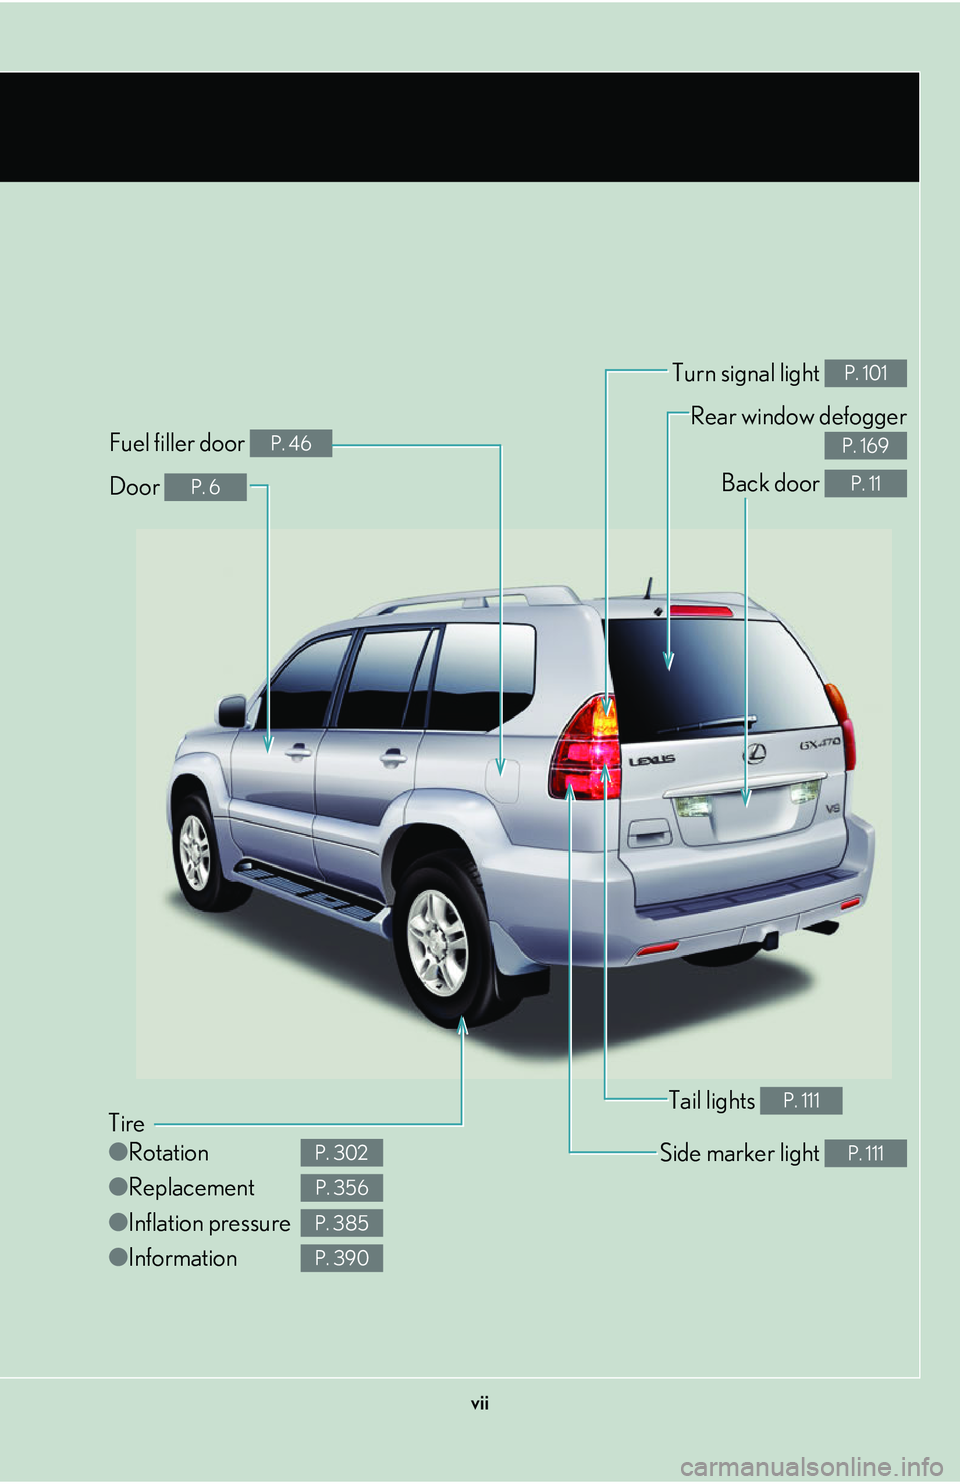 Lexus GX470 2007  Using other driving systems / vii
Tire
●Rotation
● Replacement
● Inflation pressure
● Information
P. 302
P. 356
P. 385
P. 390
Tail lights P. 111
Side marker light P. 111
Back door P. 11
Rear window defogger
 
P. 169
Door P